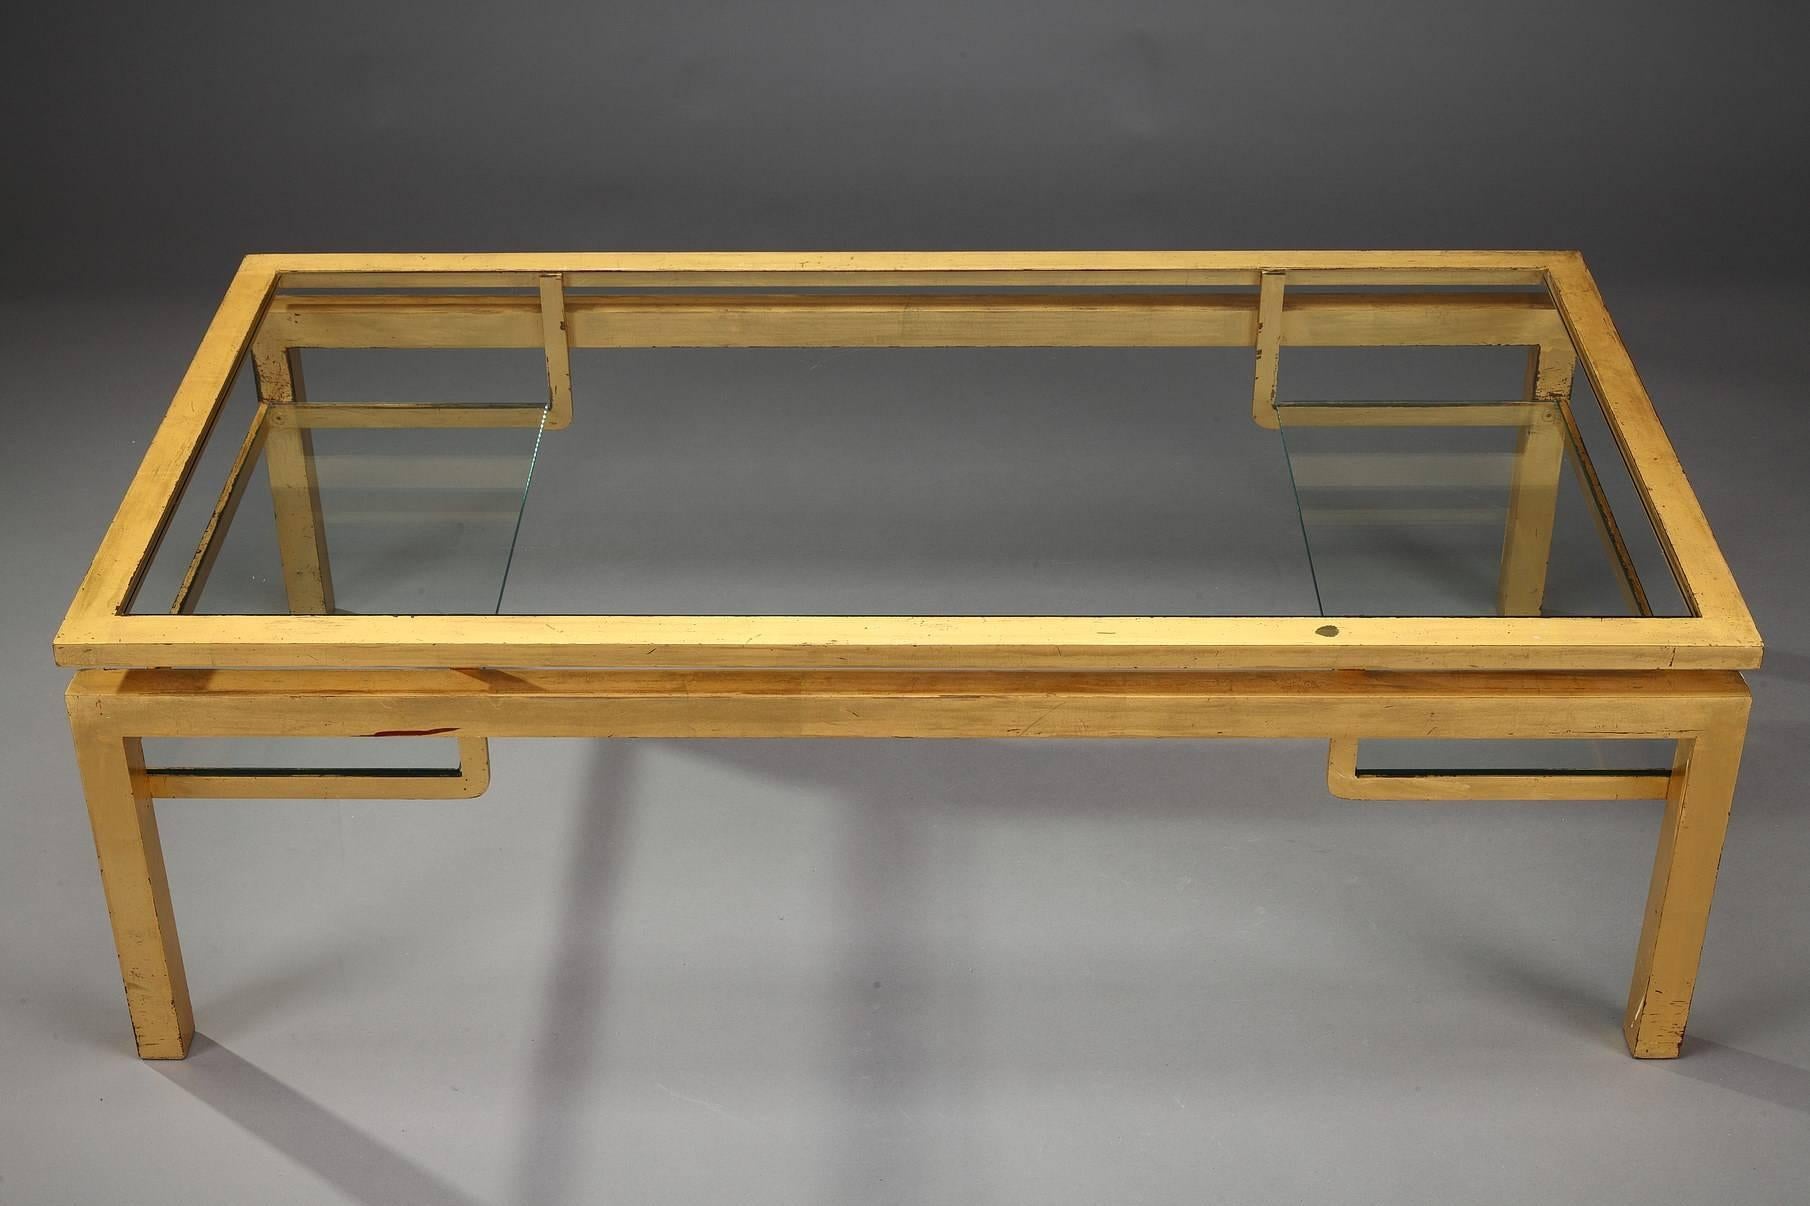 Rectangular coffee table in gilded metal with glass top, designed by Guy Lefèvre for Maison Jansen (Paris, 1880-1989). It is provided with two glass display shelves underneath. Very beautiful patina, a great Classic of the 1970s. Good vintage